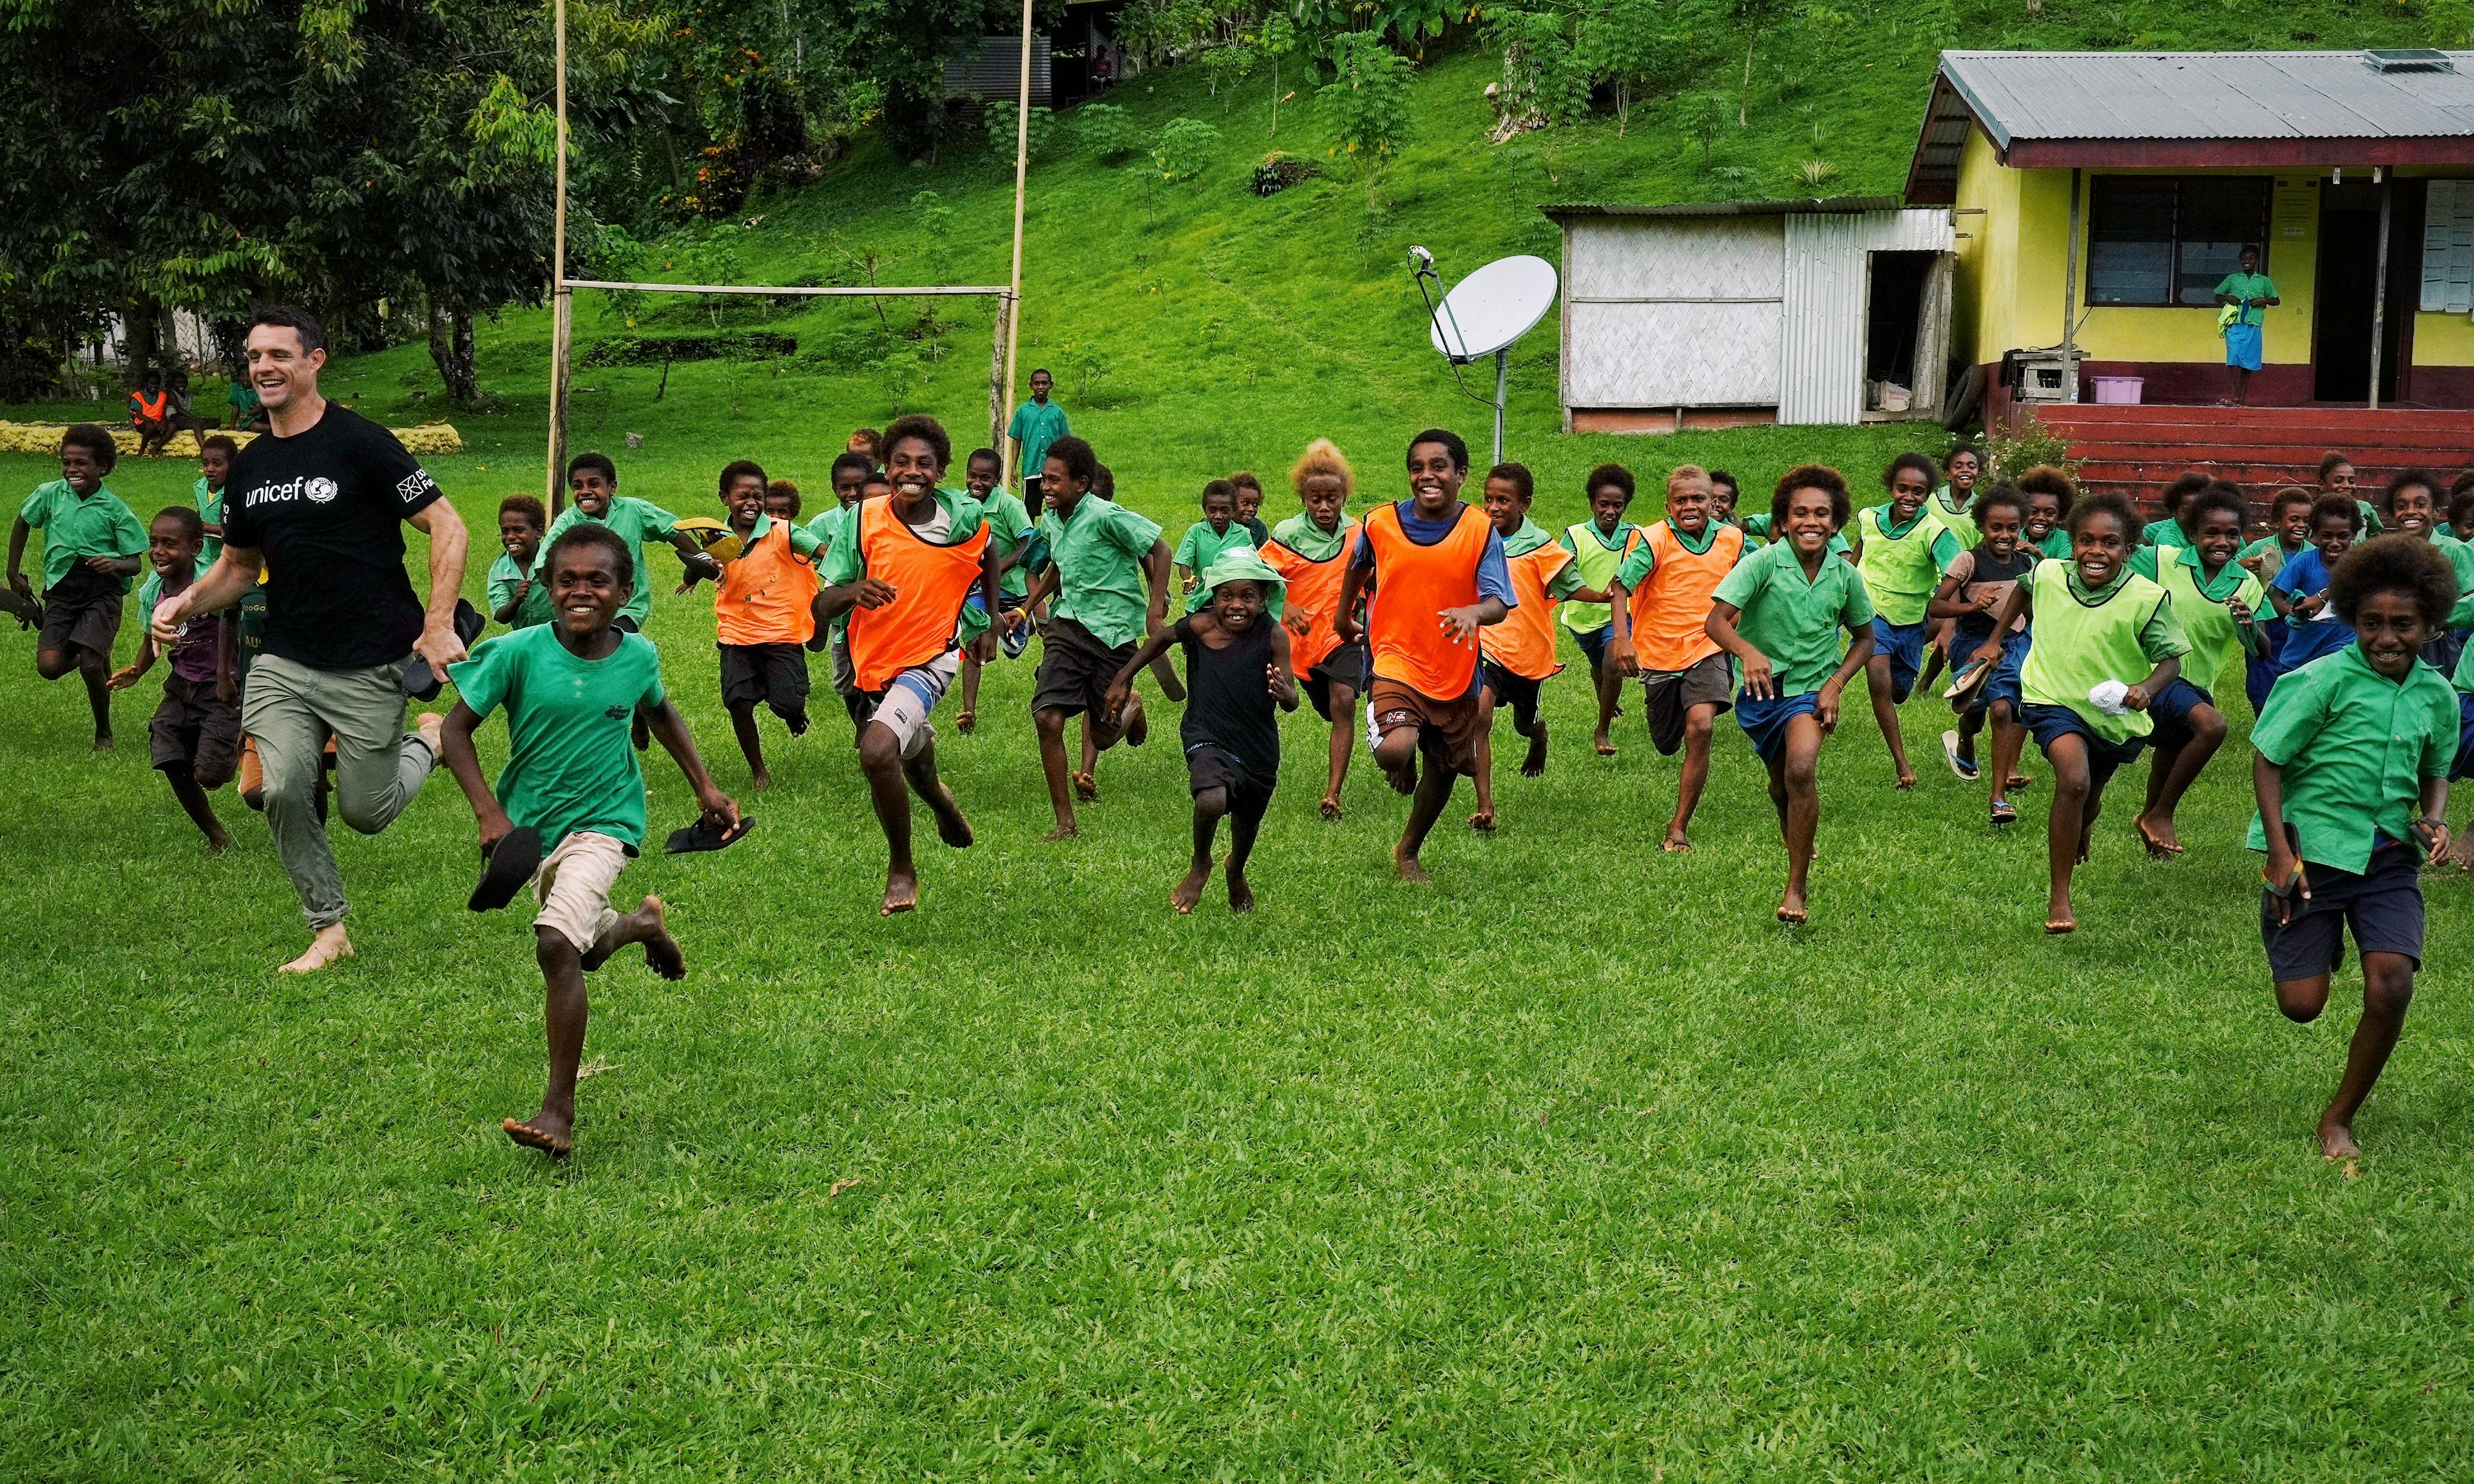 Dan Carter and school kids in Vanuatu playing rugby on the field